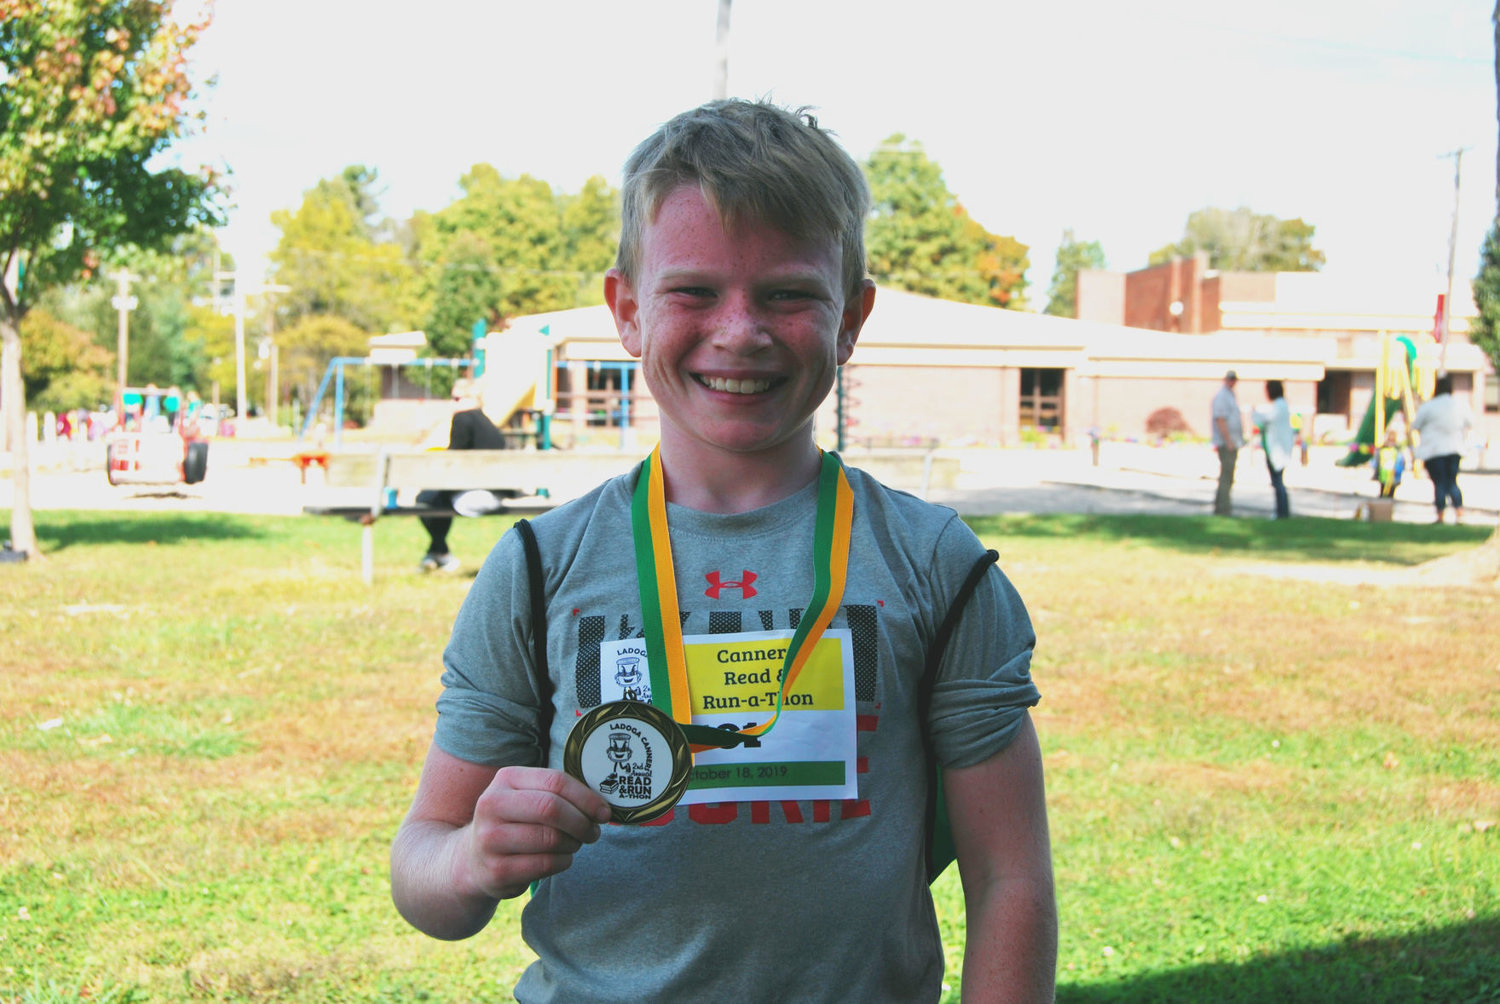 Cooper Scott, 5th Grader, finished first in the Ladoga Run-a-thon